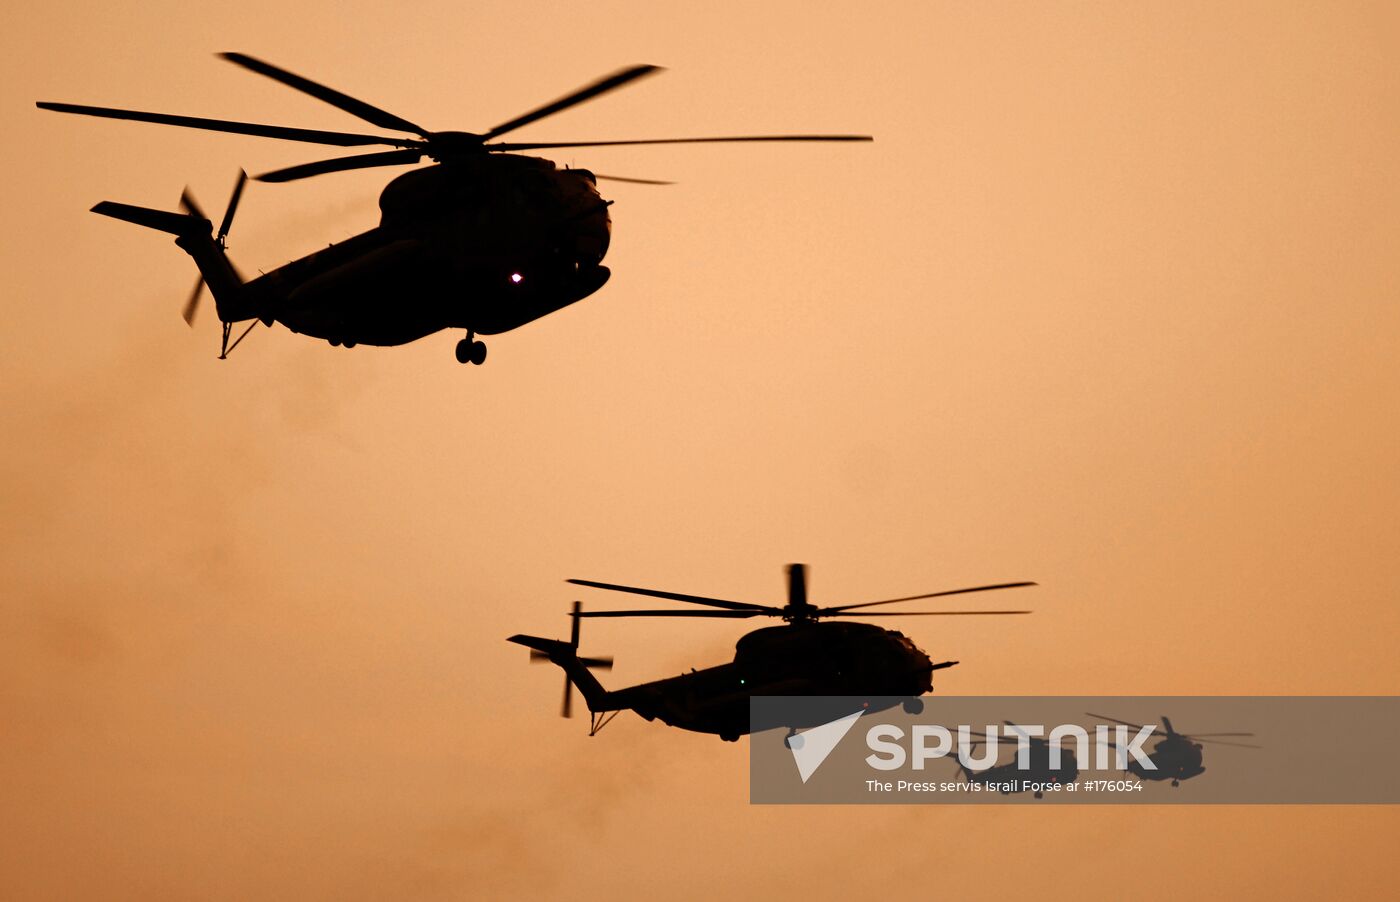 Helicopters of the Israeli Army